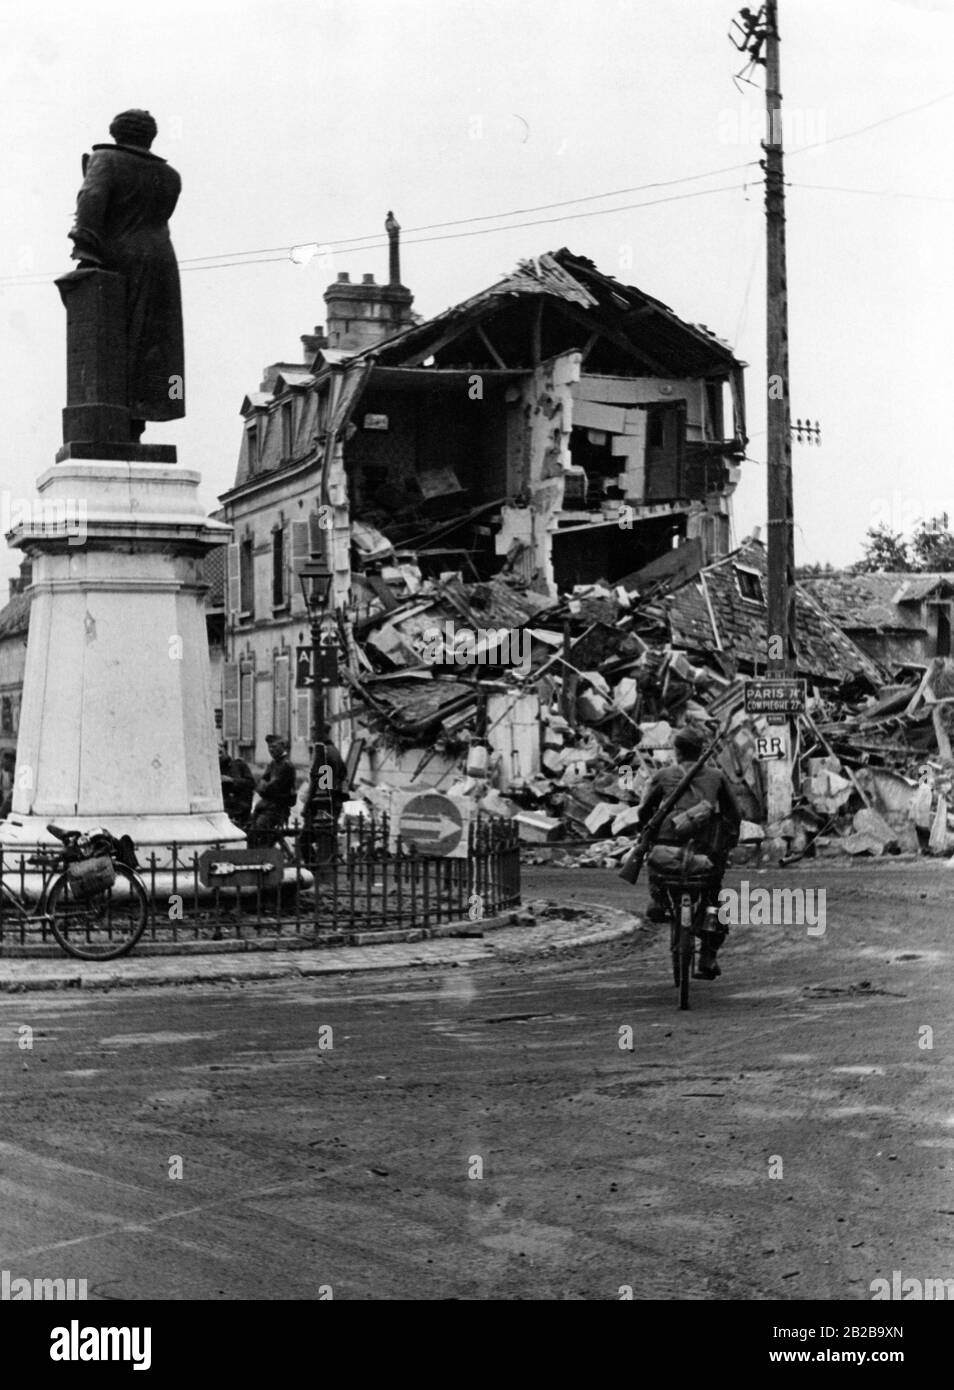 A German bicycle battalion crossing a French city on the way to Paris. In the background there is a house destroyed in the war. On the left is an unscathed monument. Stock Photo